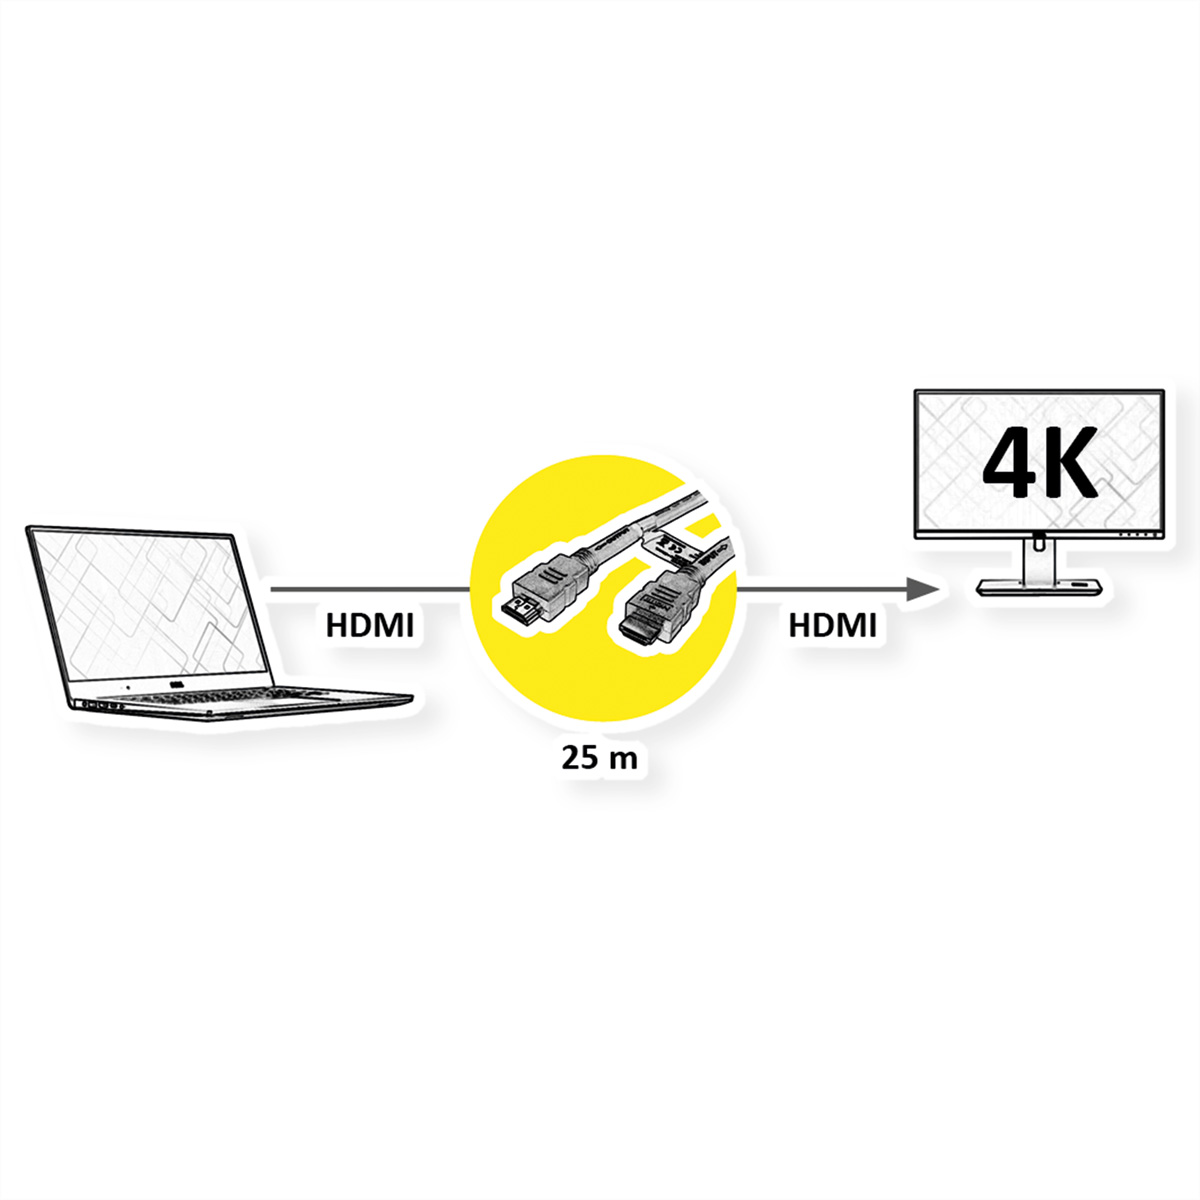 ROLINE HDMI High Speed mit Repeater Ethernet Ethernet mit mit High Kabel, Speed HDMI Kabel